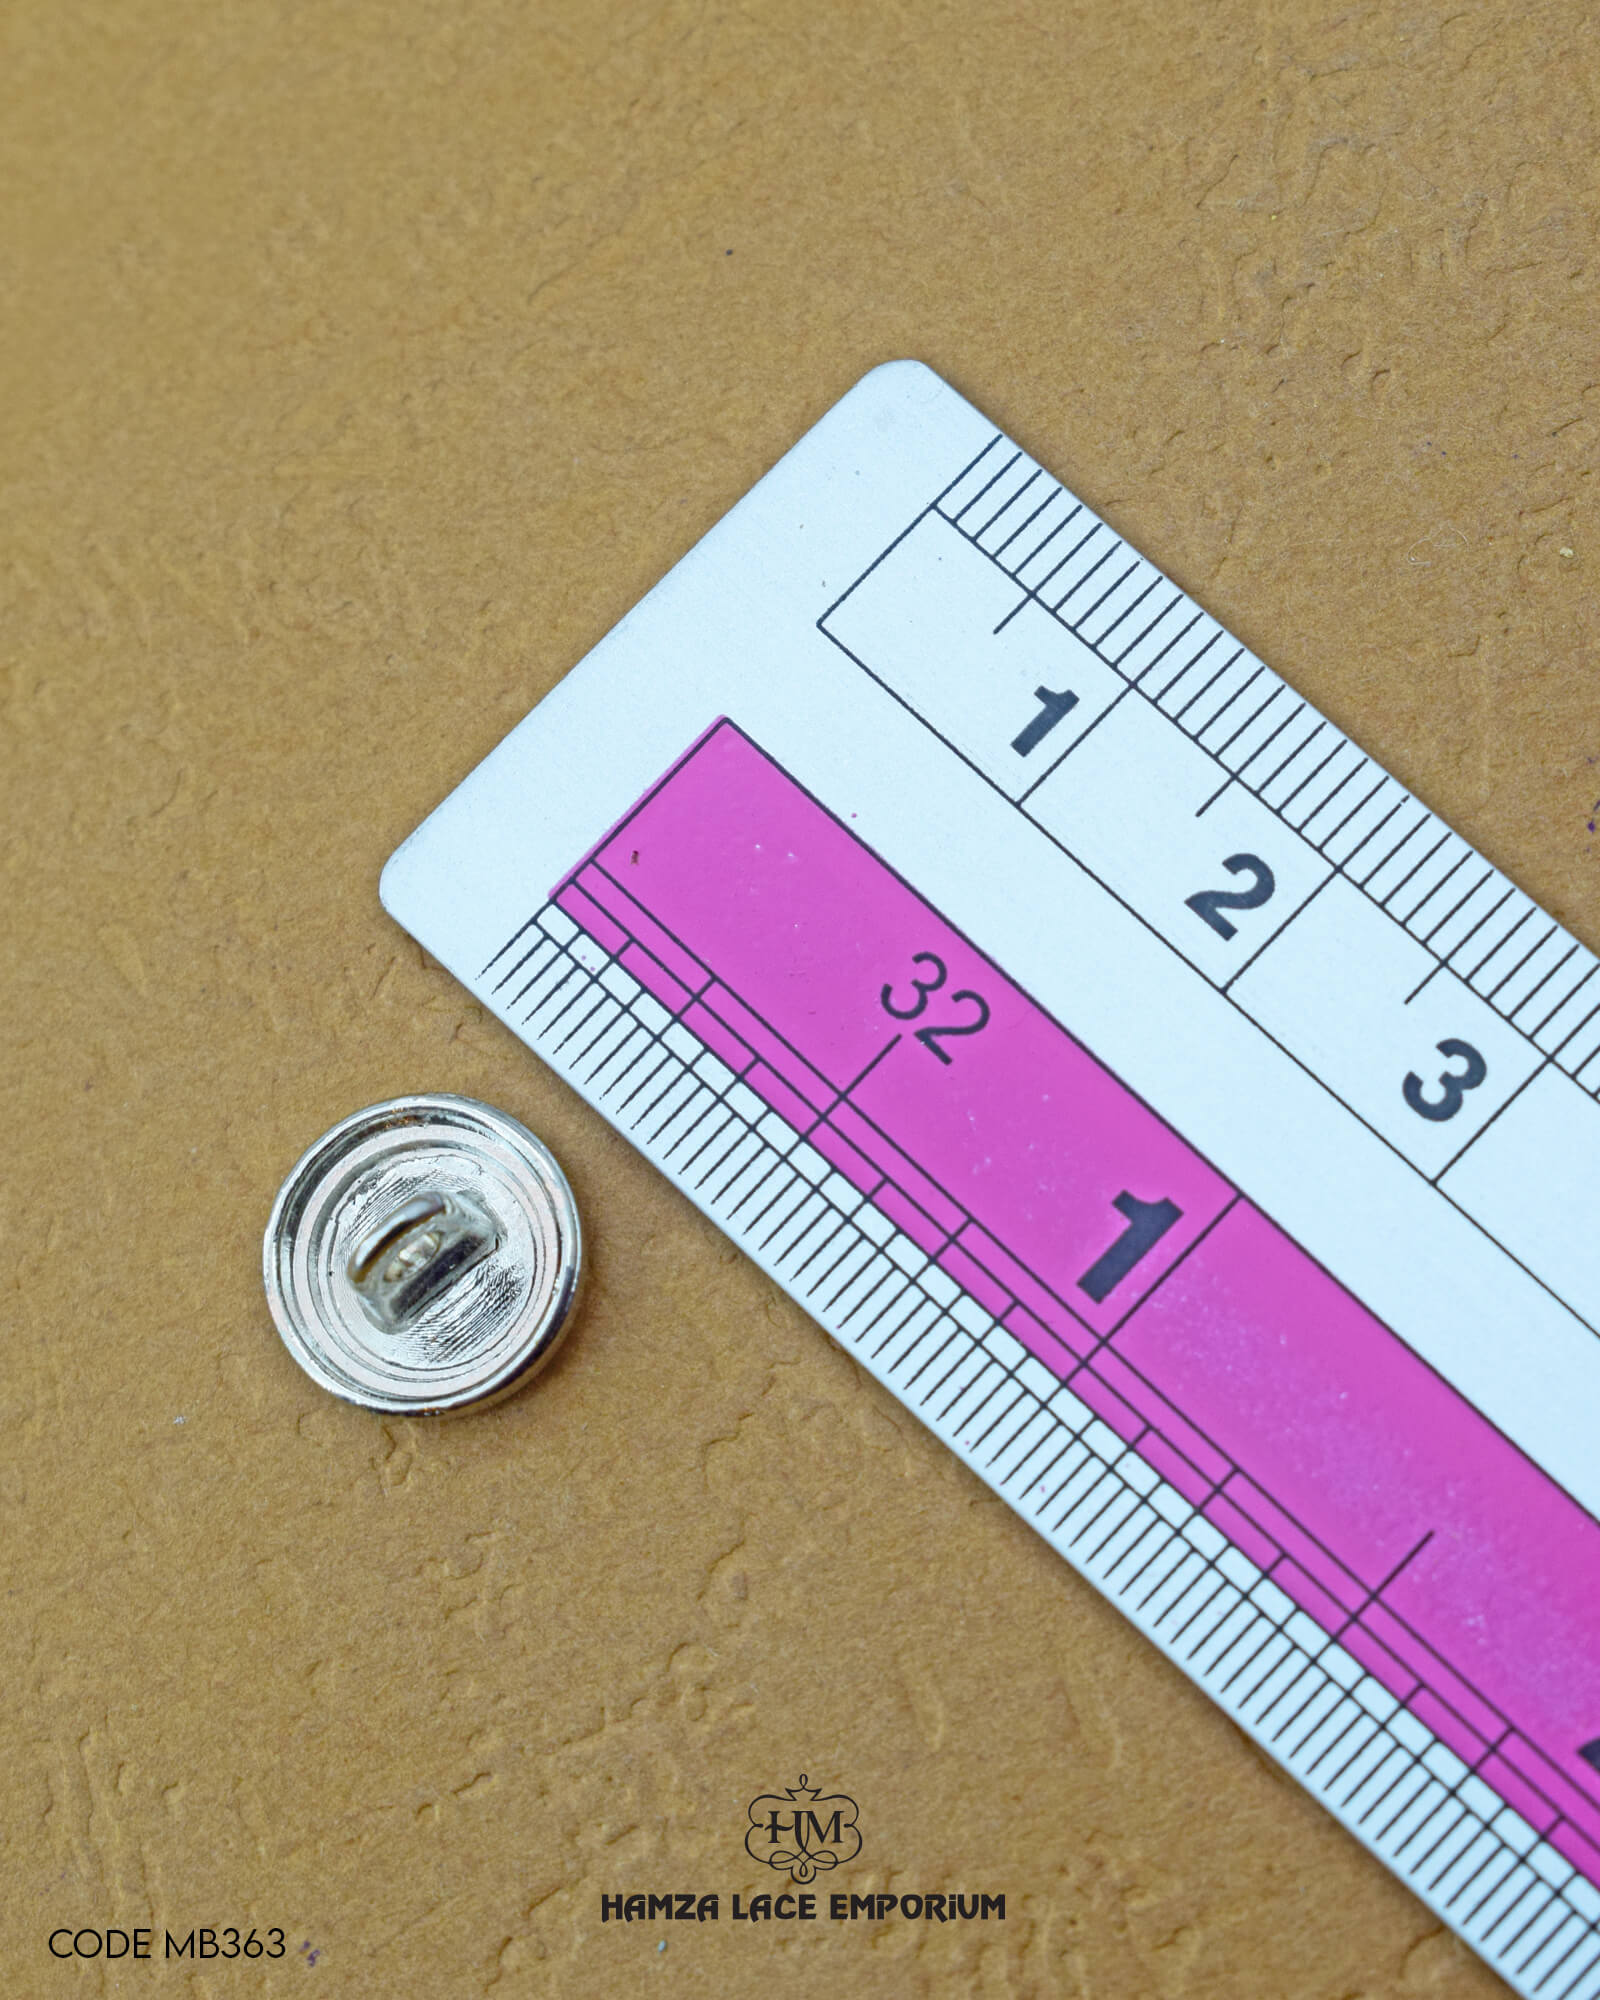 The size of the 'Metal Silver Button MB363' is measured using a ruler.